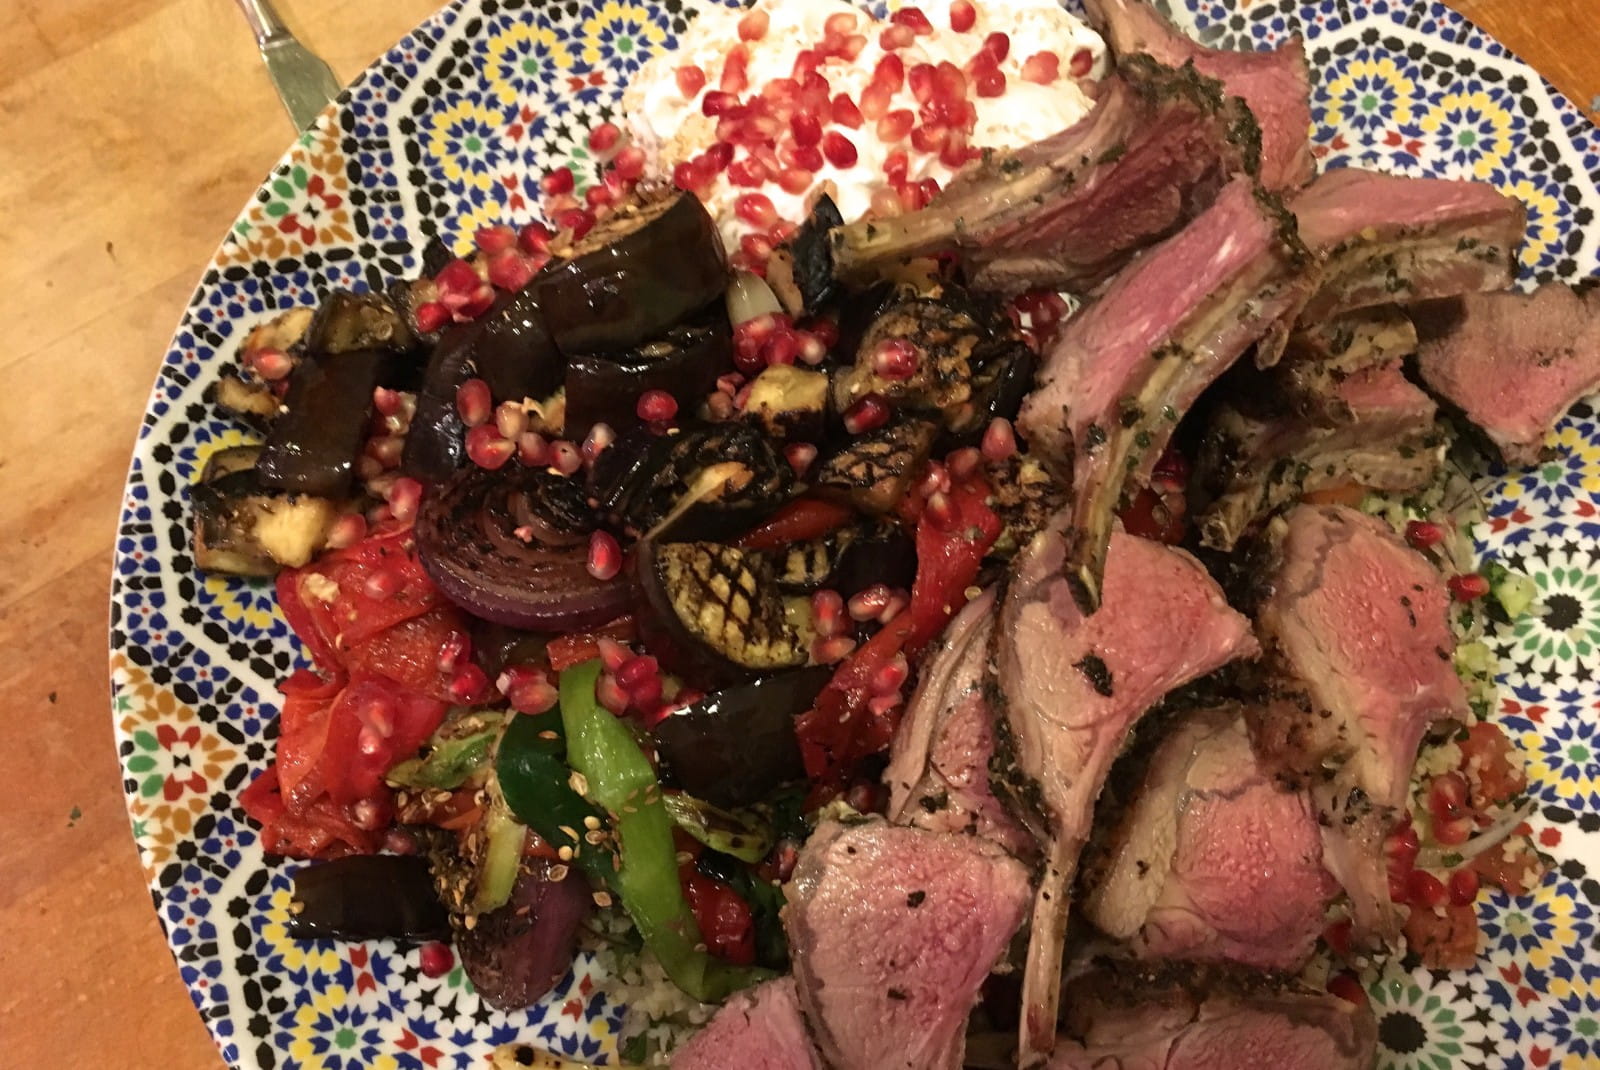 Middle eastern-style lamb with grilled vegetables and a natural red wine